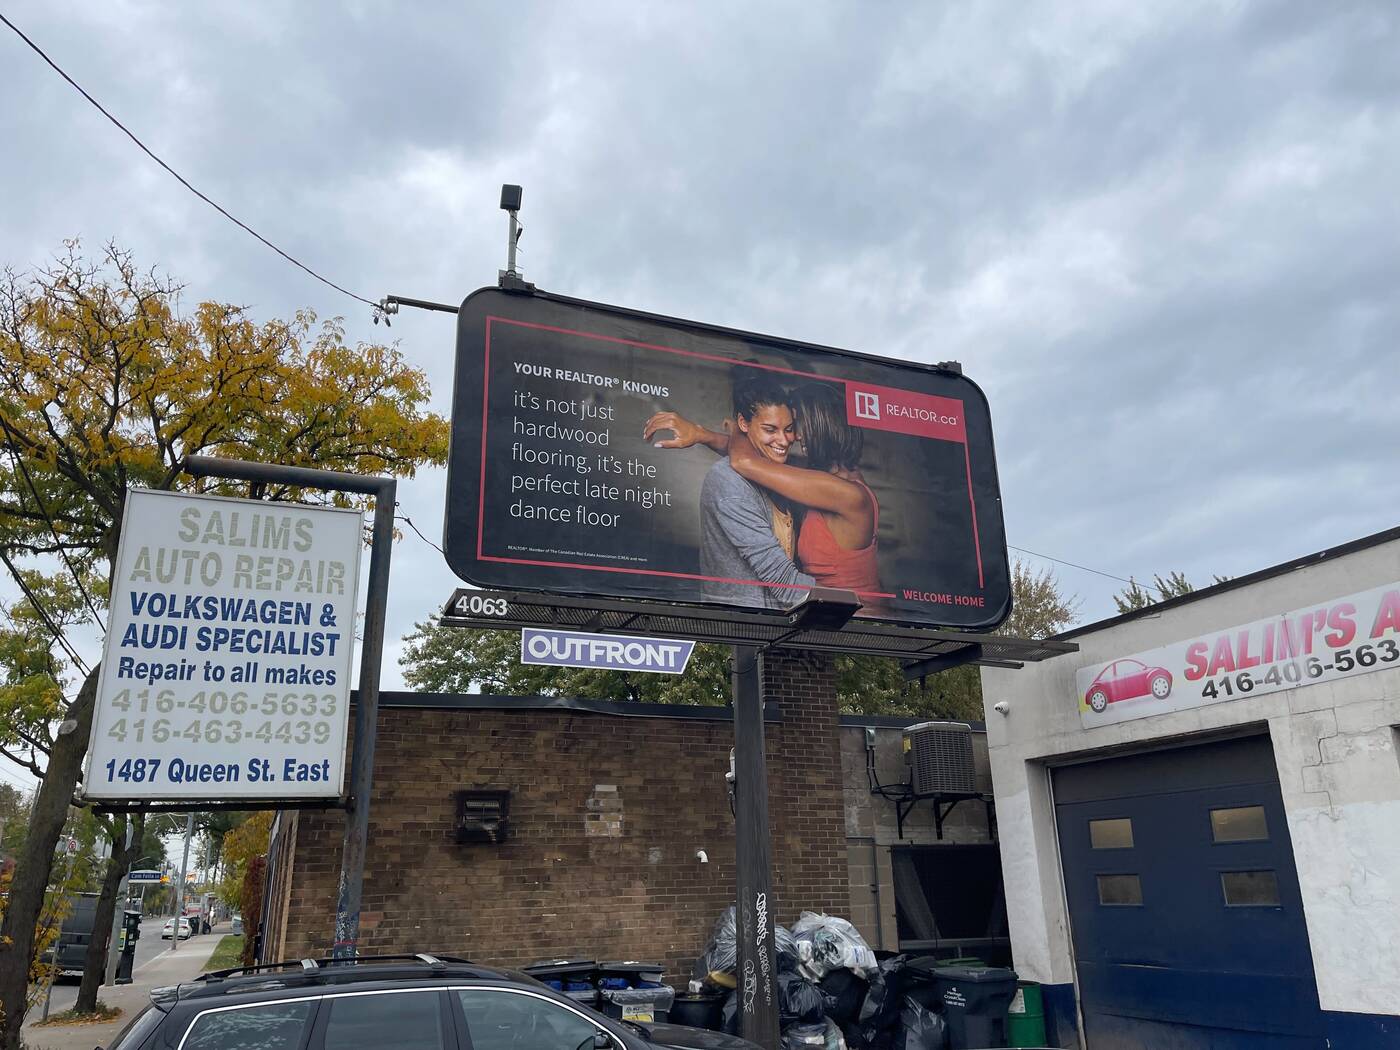 People in Toronto are really loving this billboard right now